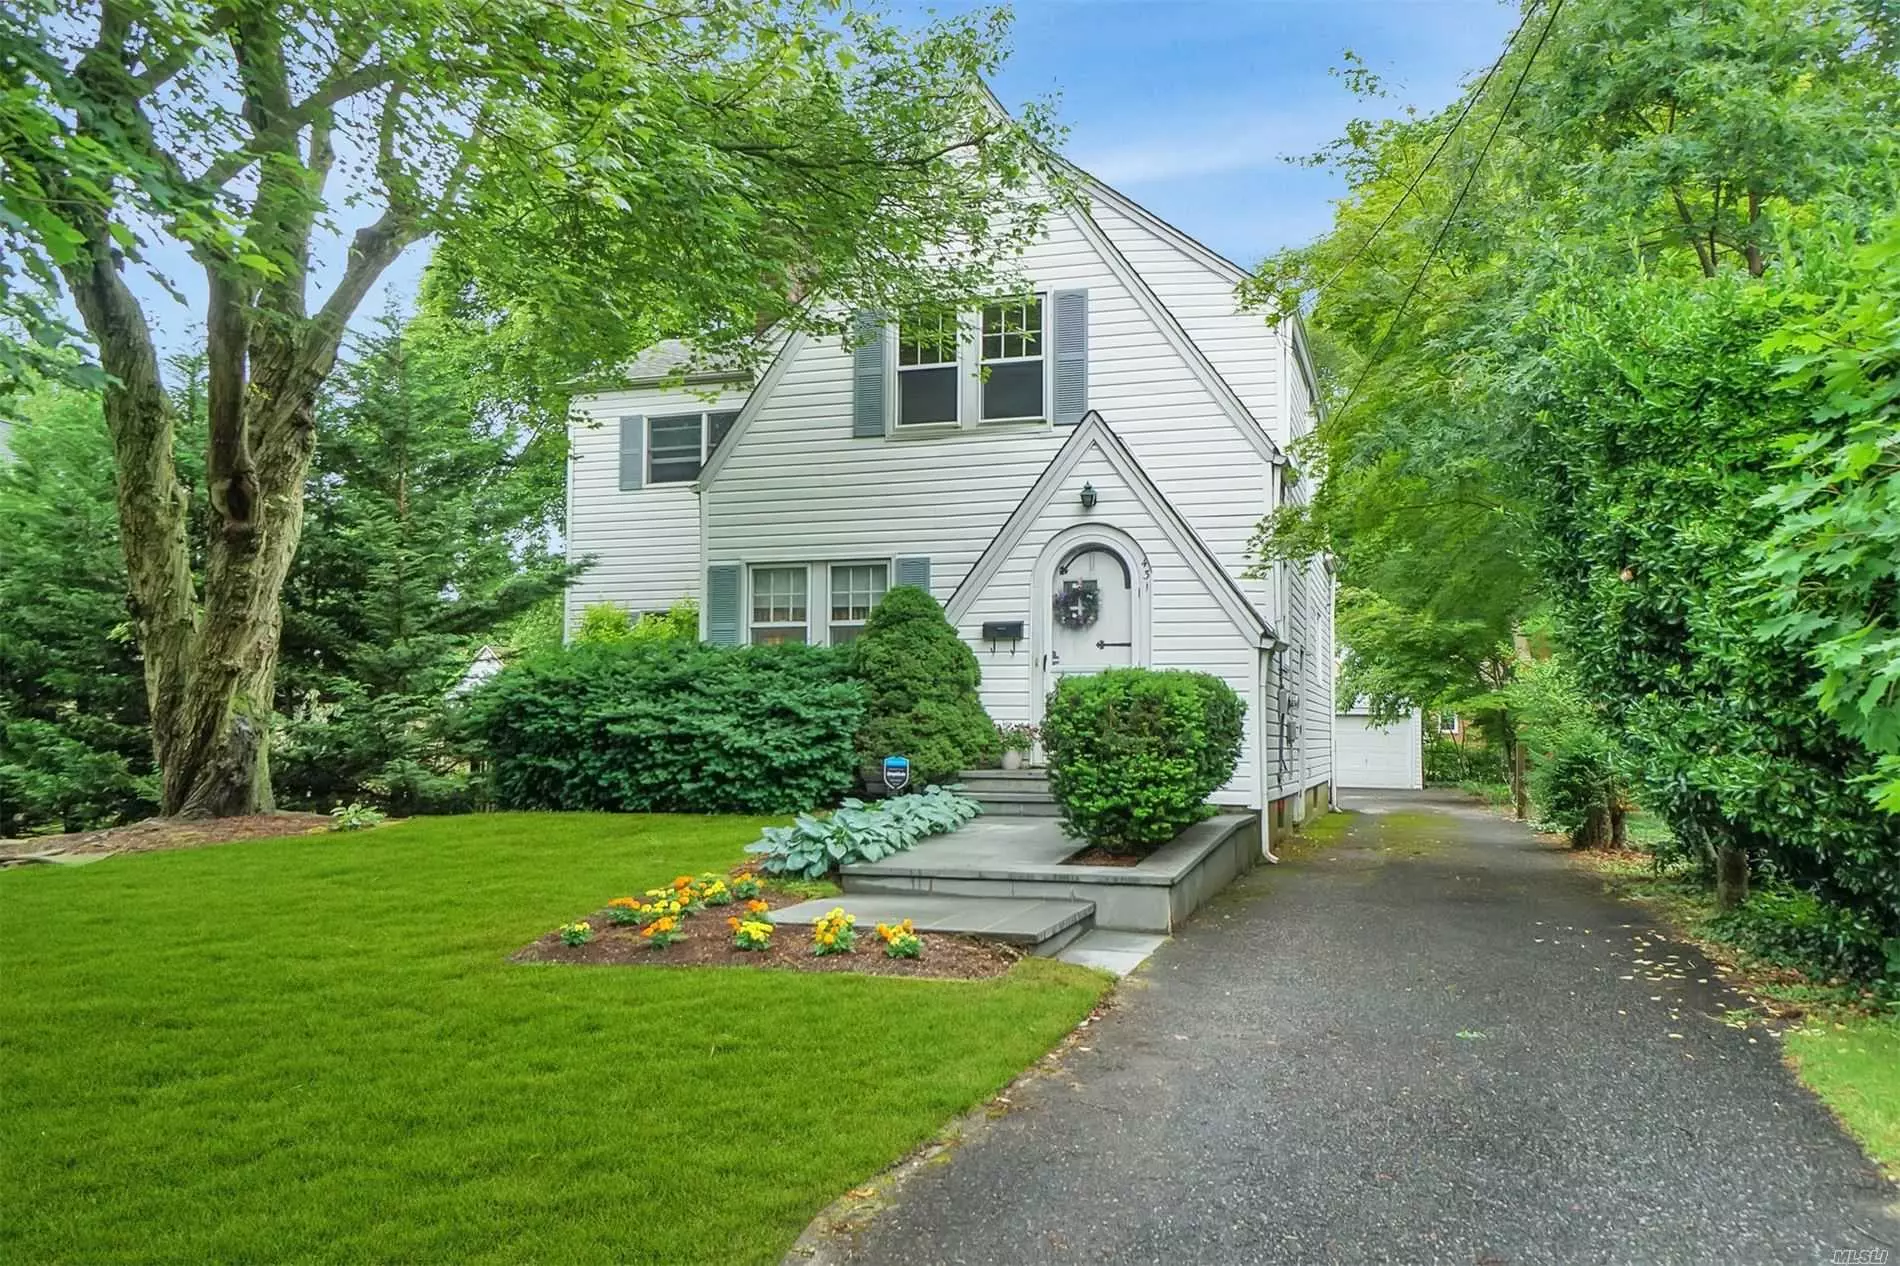 Beautiful Village Colonial Circa 1908 featuring New Kitchen, Formal Living Room with Fireplace, Den, master Bedroom with Bath, Full Dry Basement, Detached 2 car garage on 72X150 Lot!- This is the one you have been waiting for!-